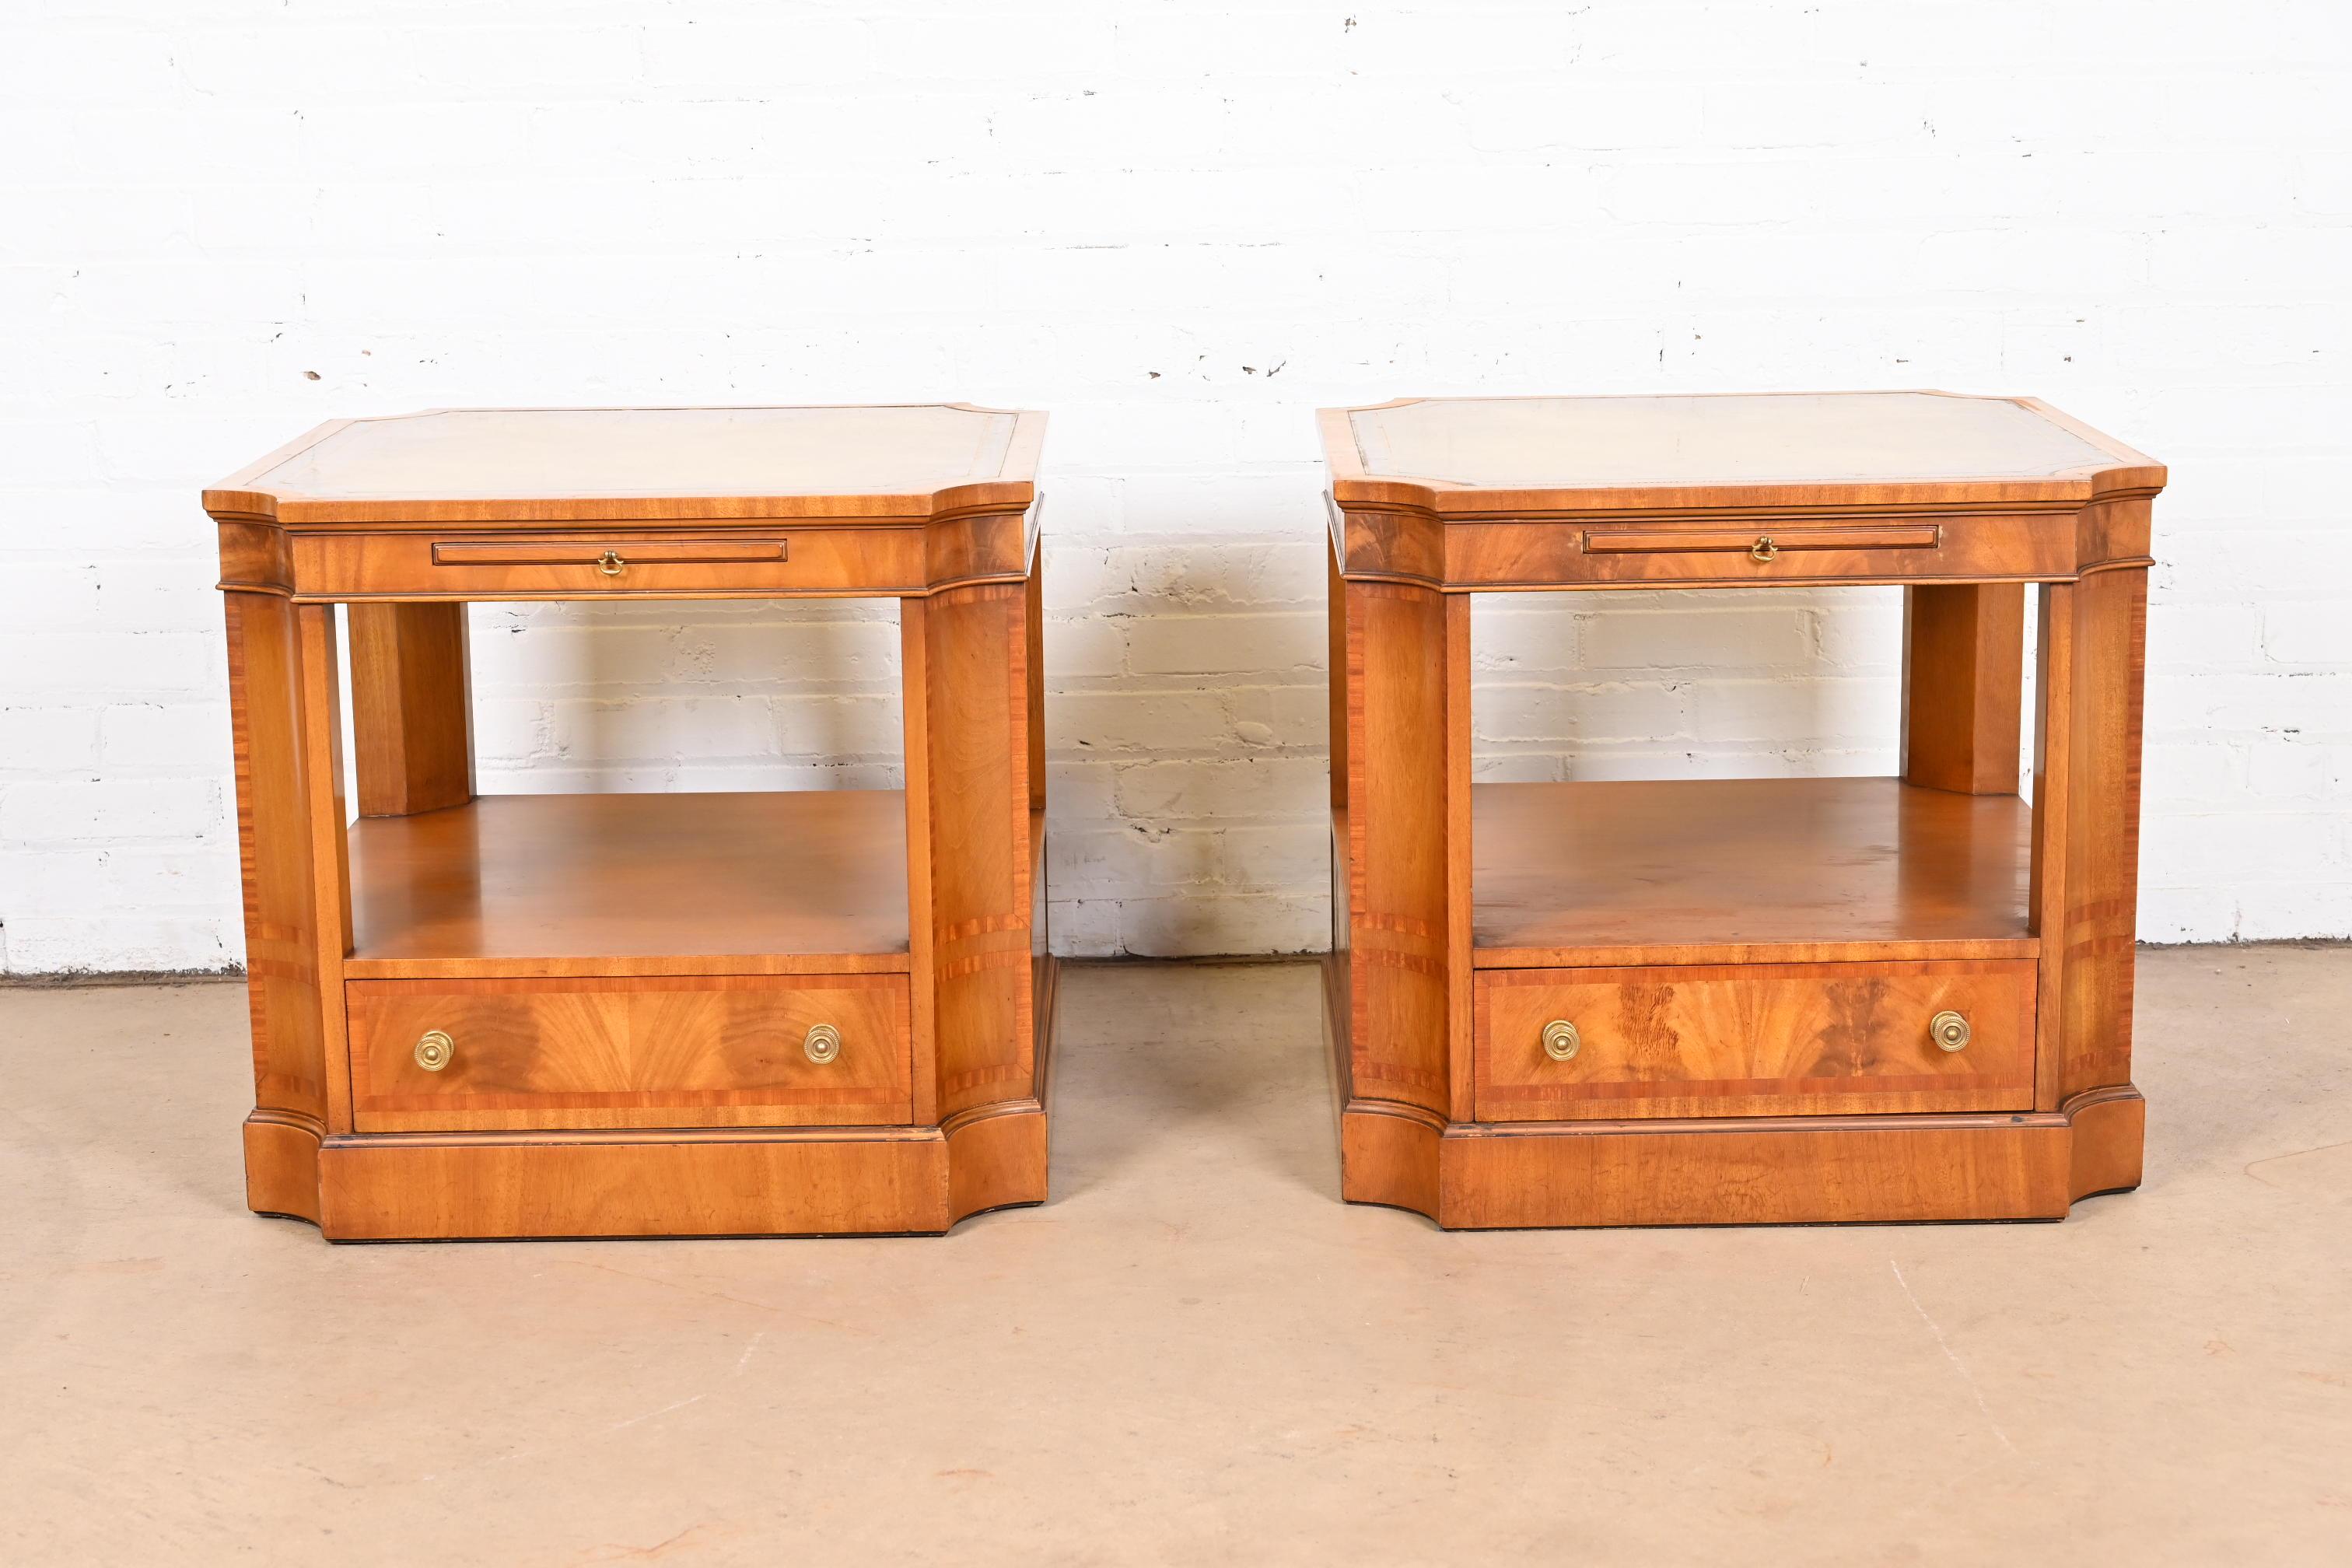 American Baker Furniture Regency Flame Mahogany Leather Top Nightstands or End Tables For Sale